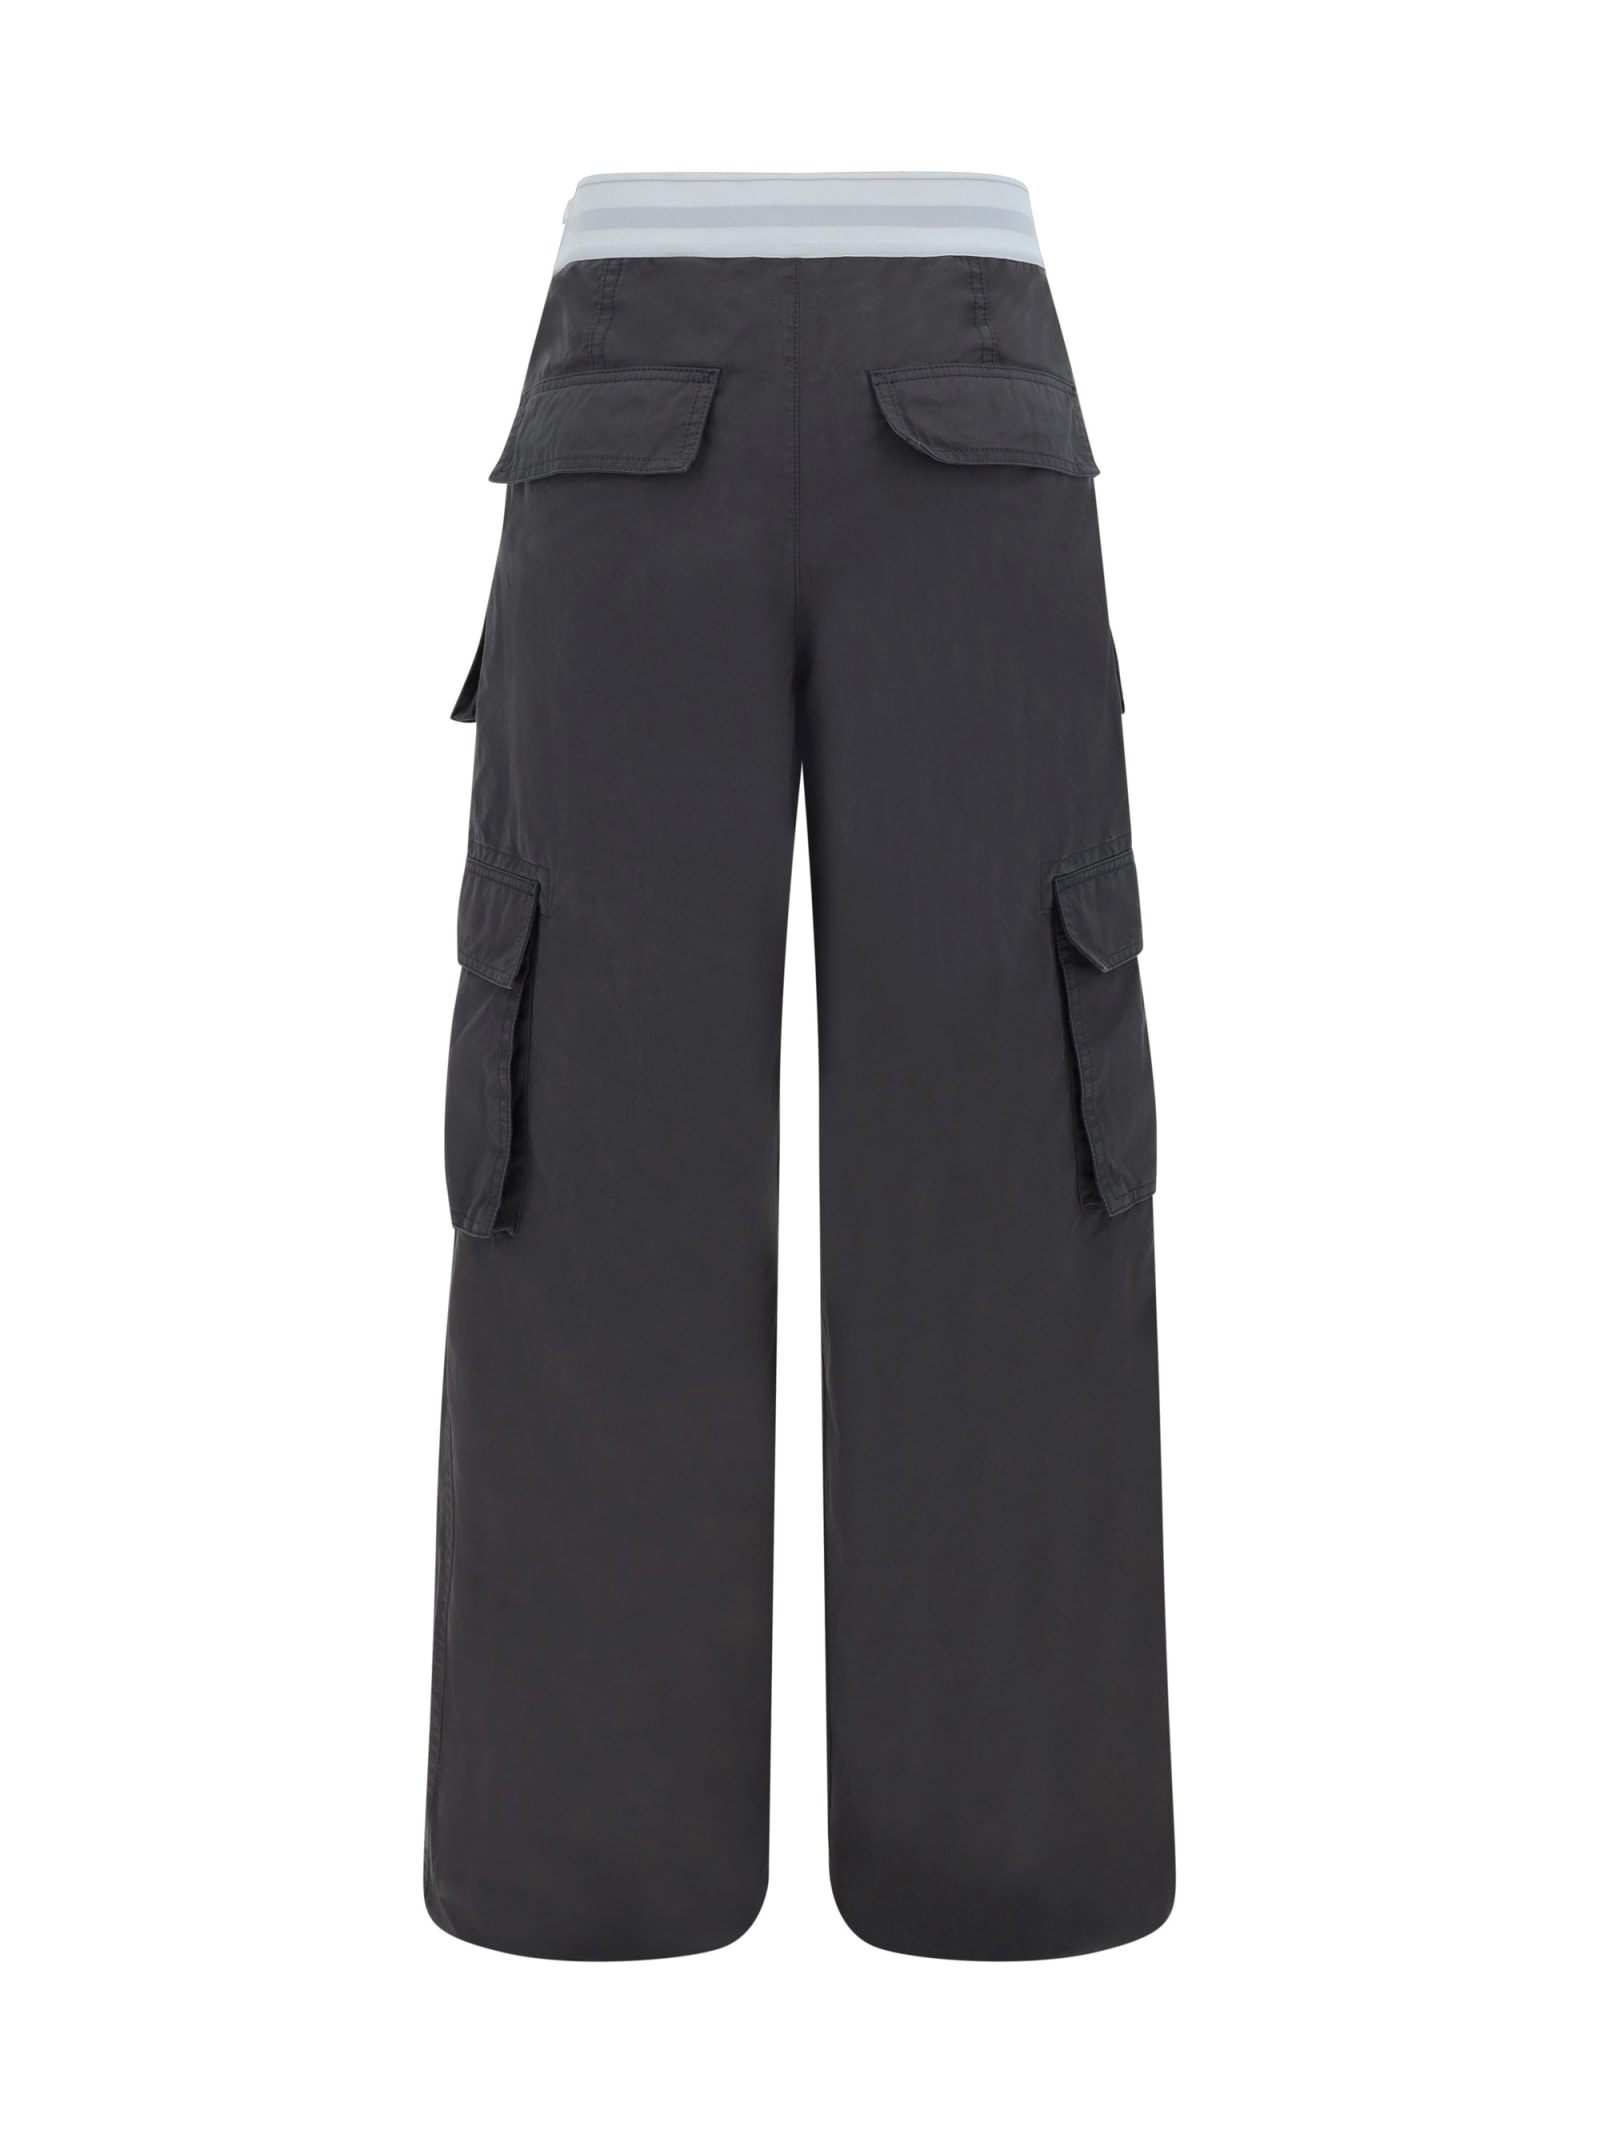 contrasting panel bootcut trousers, Alexander Wang